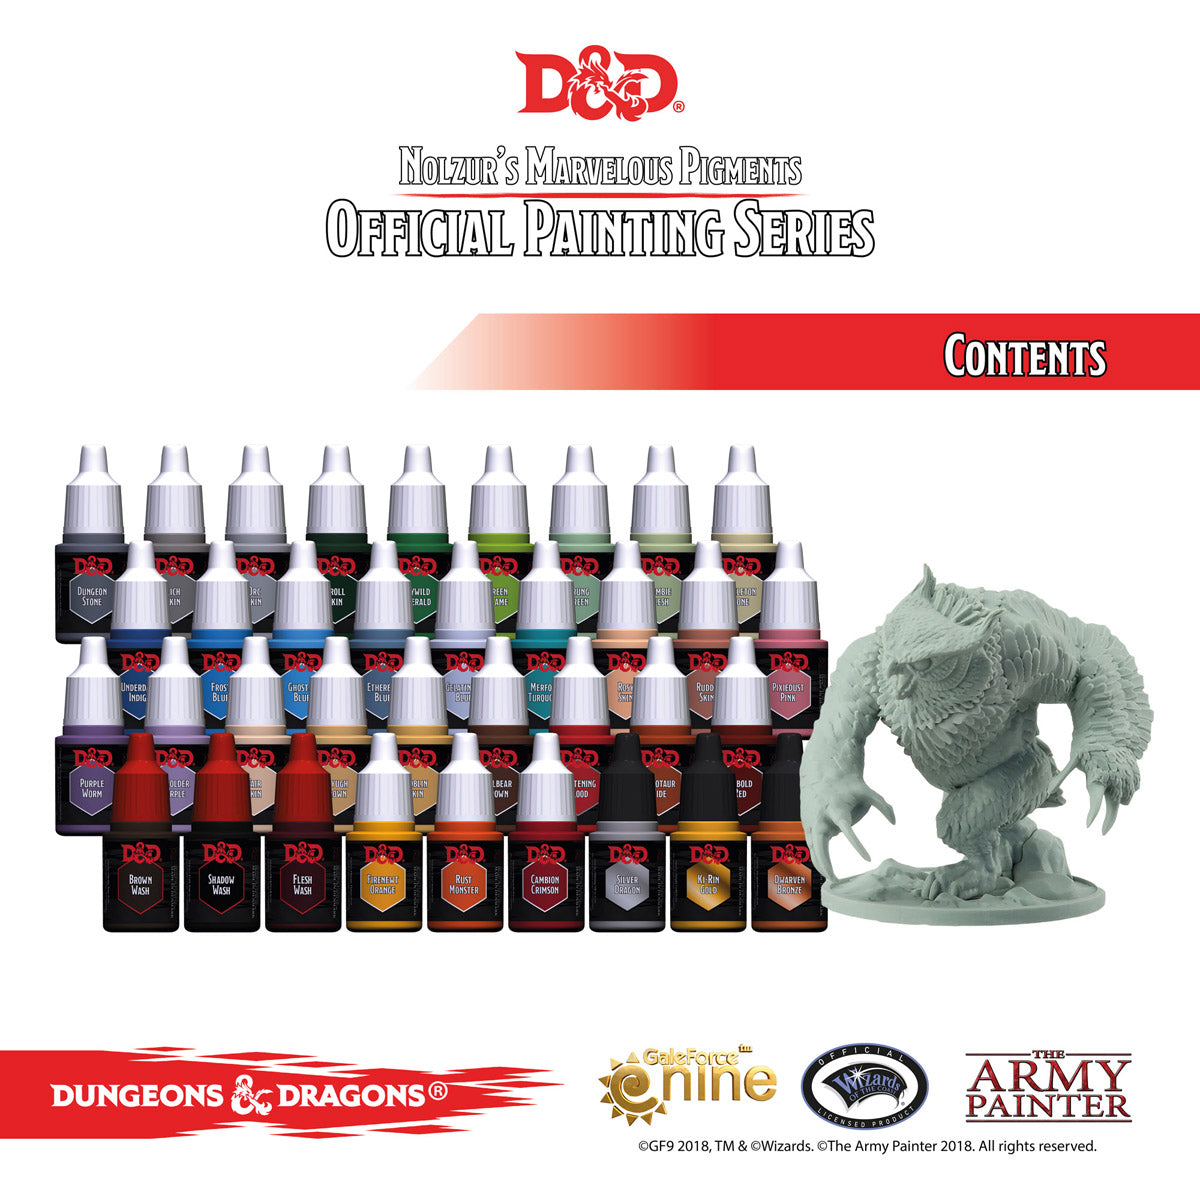 Nolzur's Marvelous Pigments Has Everything You Need To Paint Like a Pro -  the Roarbots